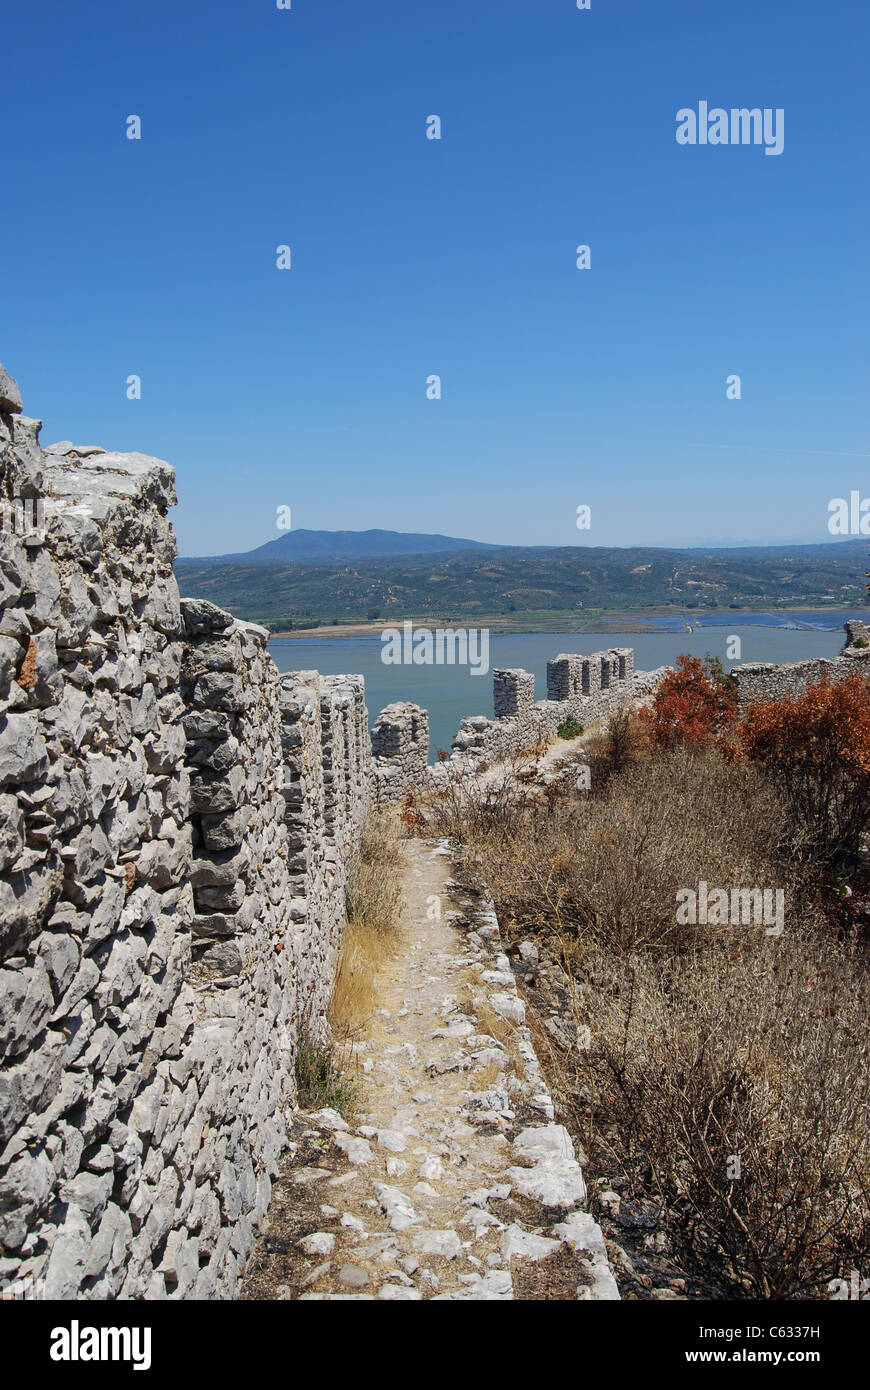 View of Gialova Lagoon and the Peloponnese mountains from the wall of the Old Frankish castle (Paliokastro) Stock Photo